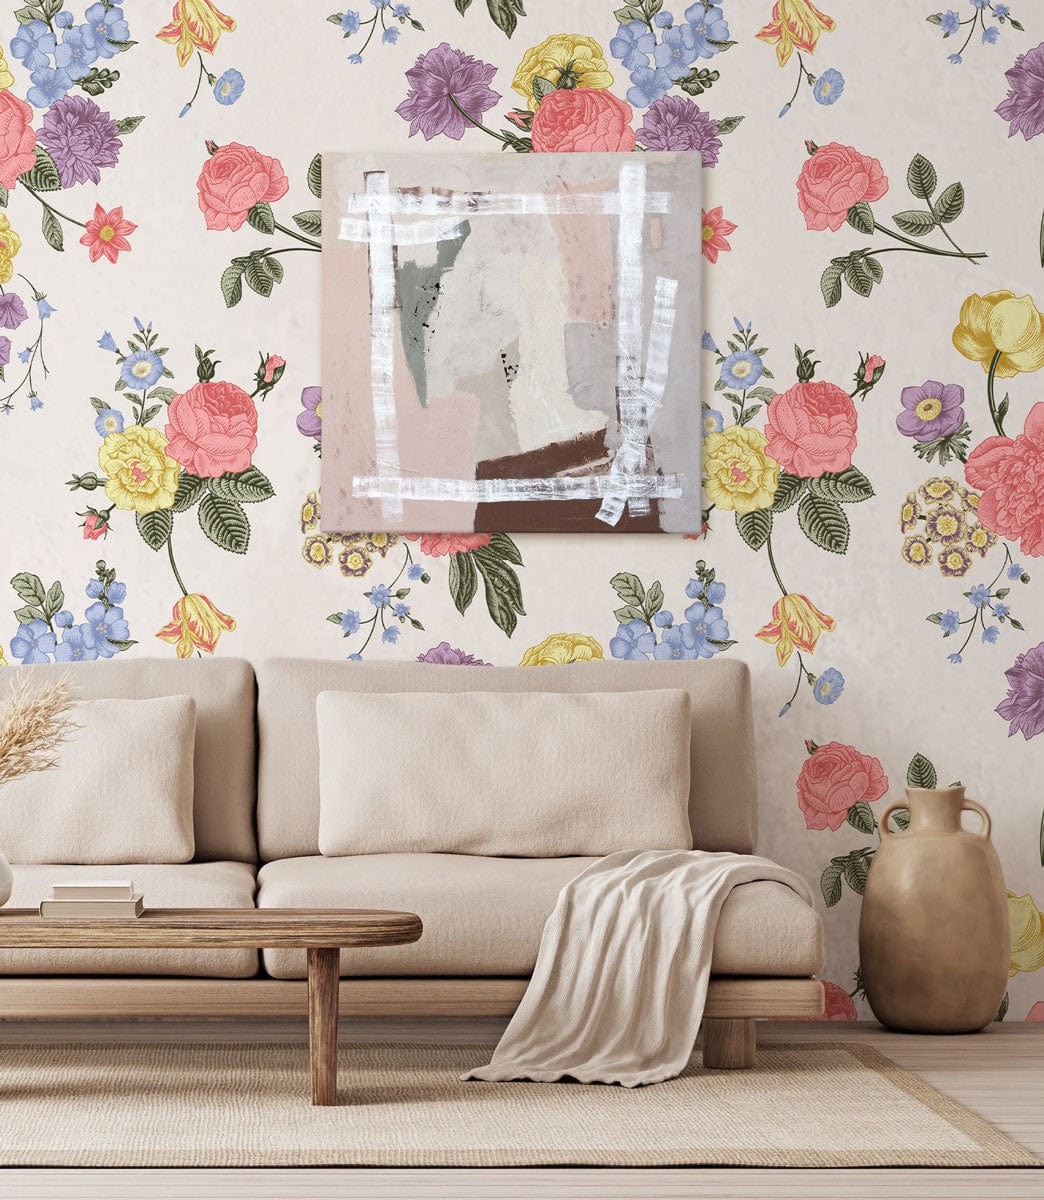 Wallpaper mural featuring light and colorful bouquets, perfect for decorating the living room.